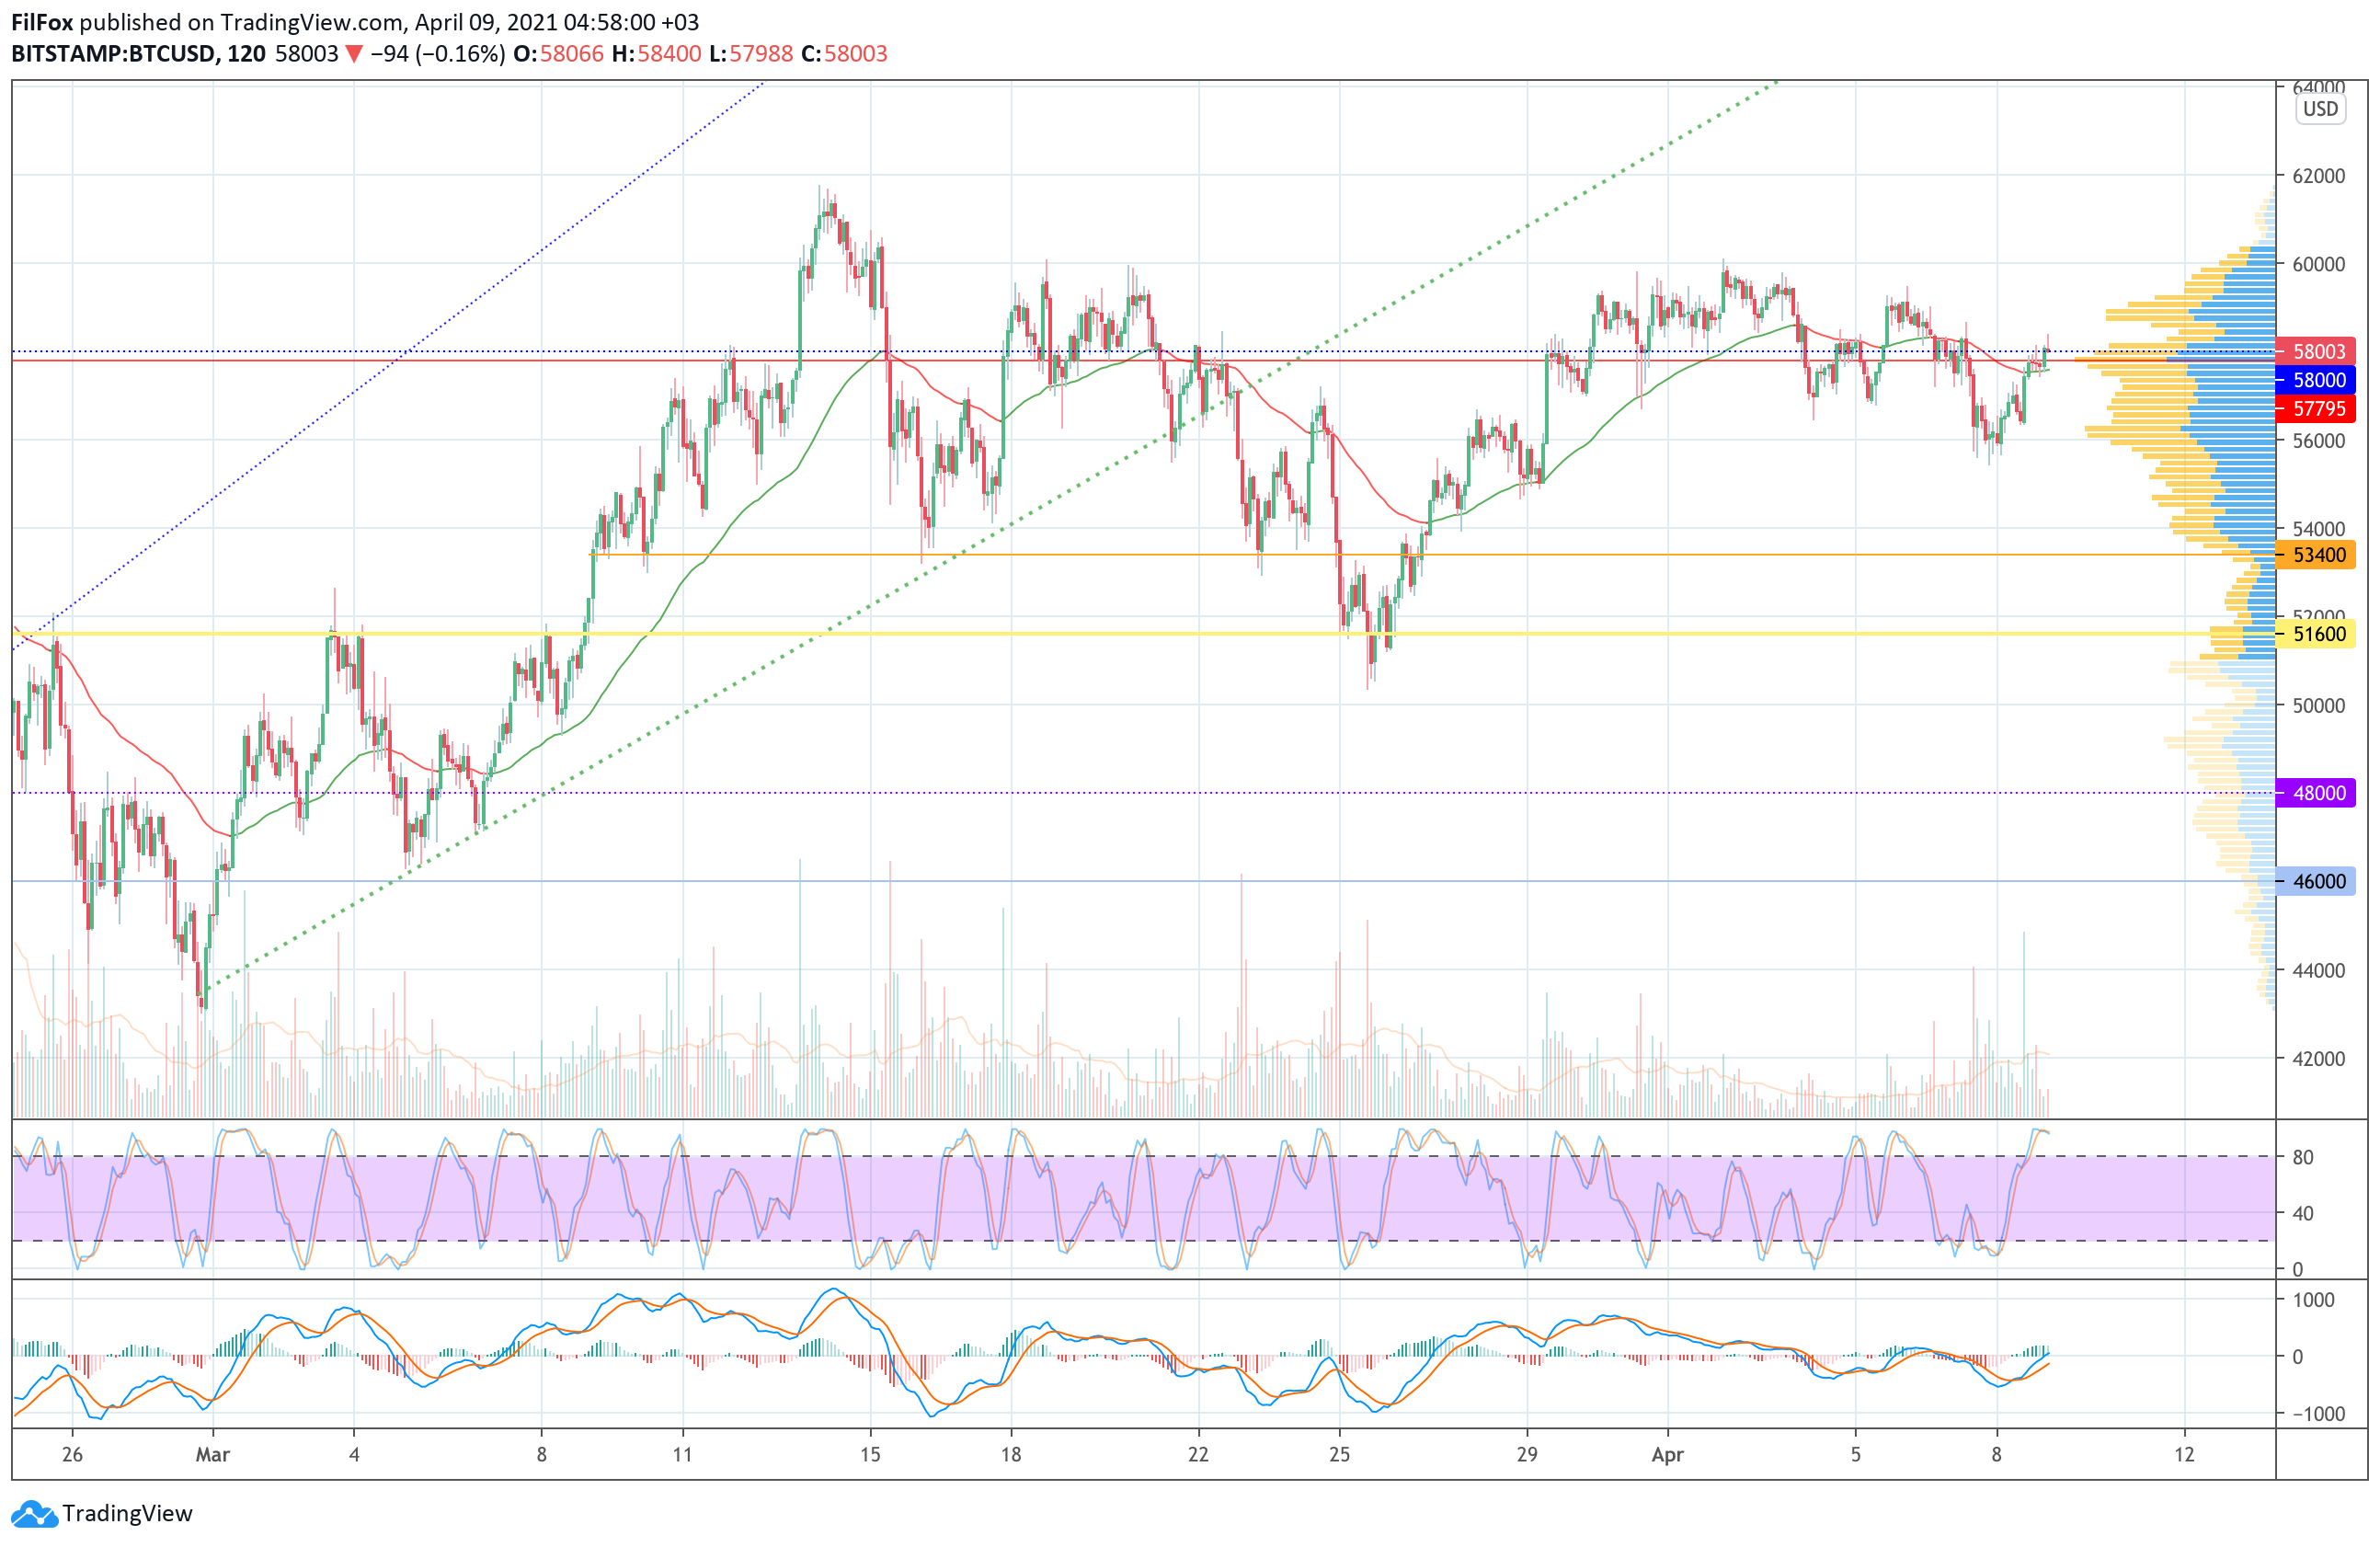 Analysis of the prices of Bitcoin, Ethereum, XRP for 04/09/2021